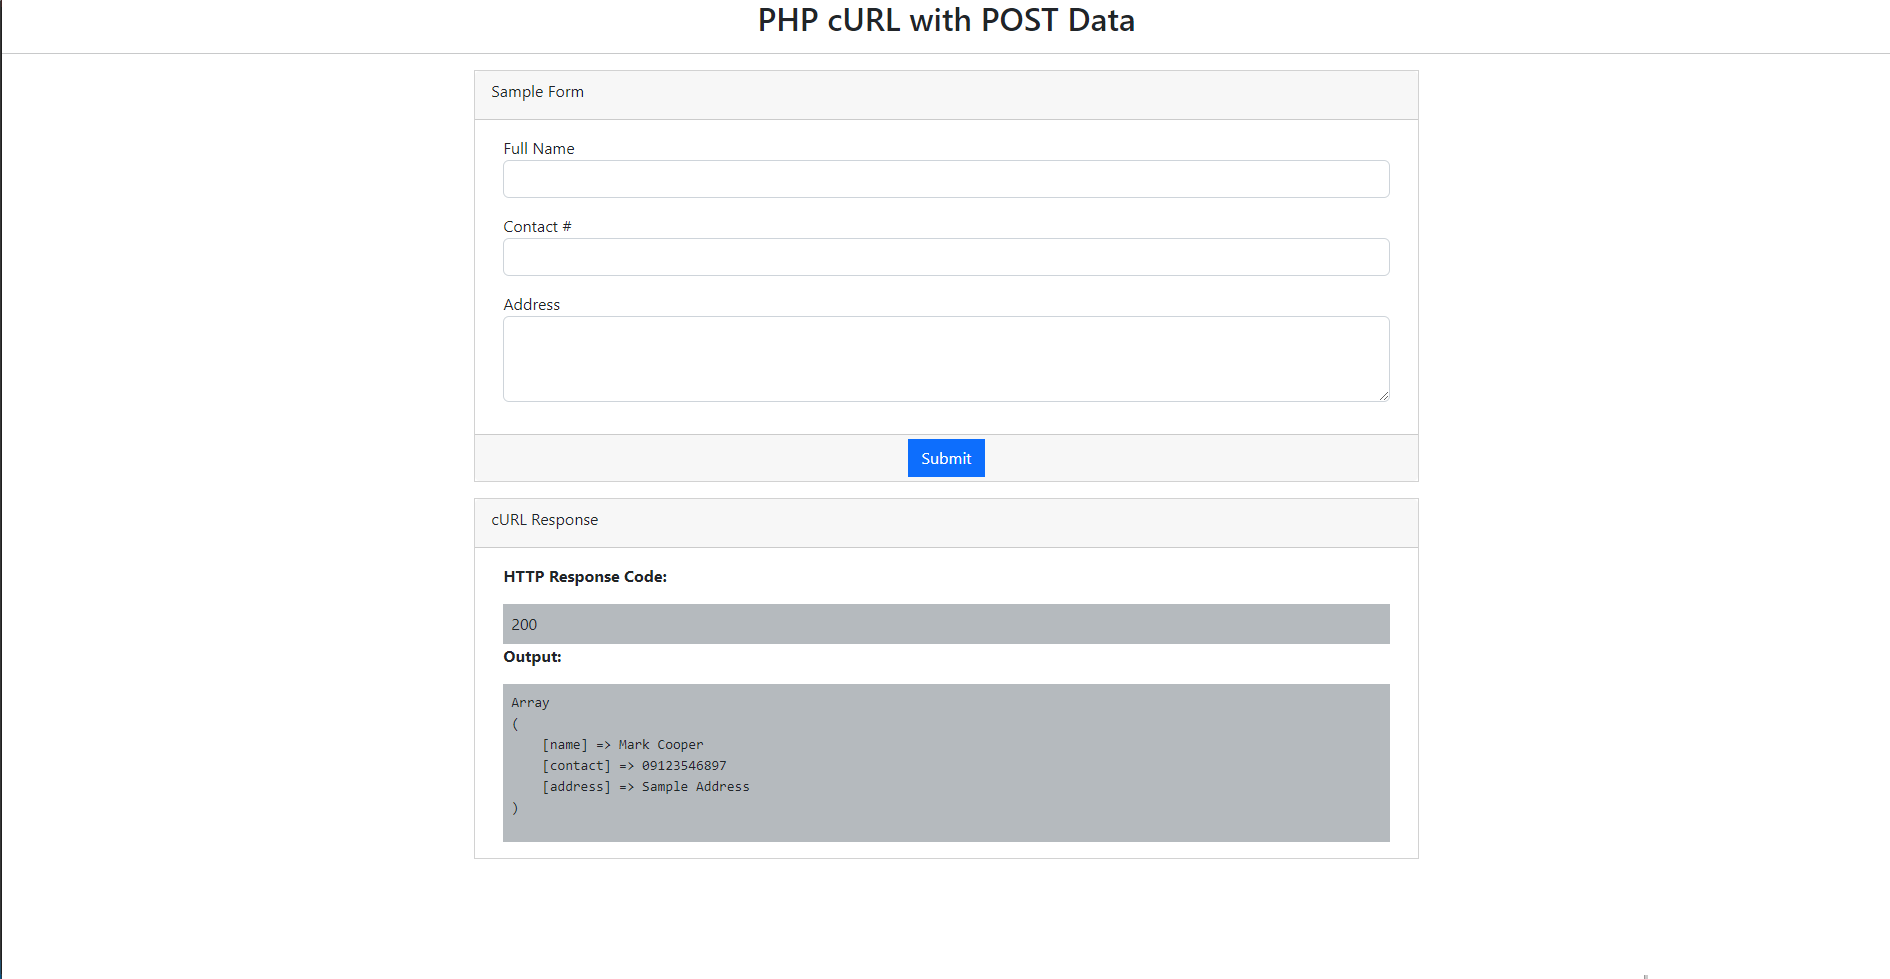 Using PHP cURL with POST Data